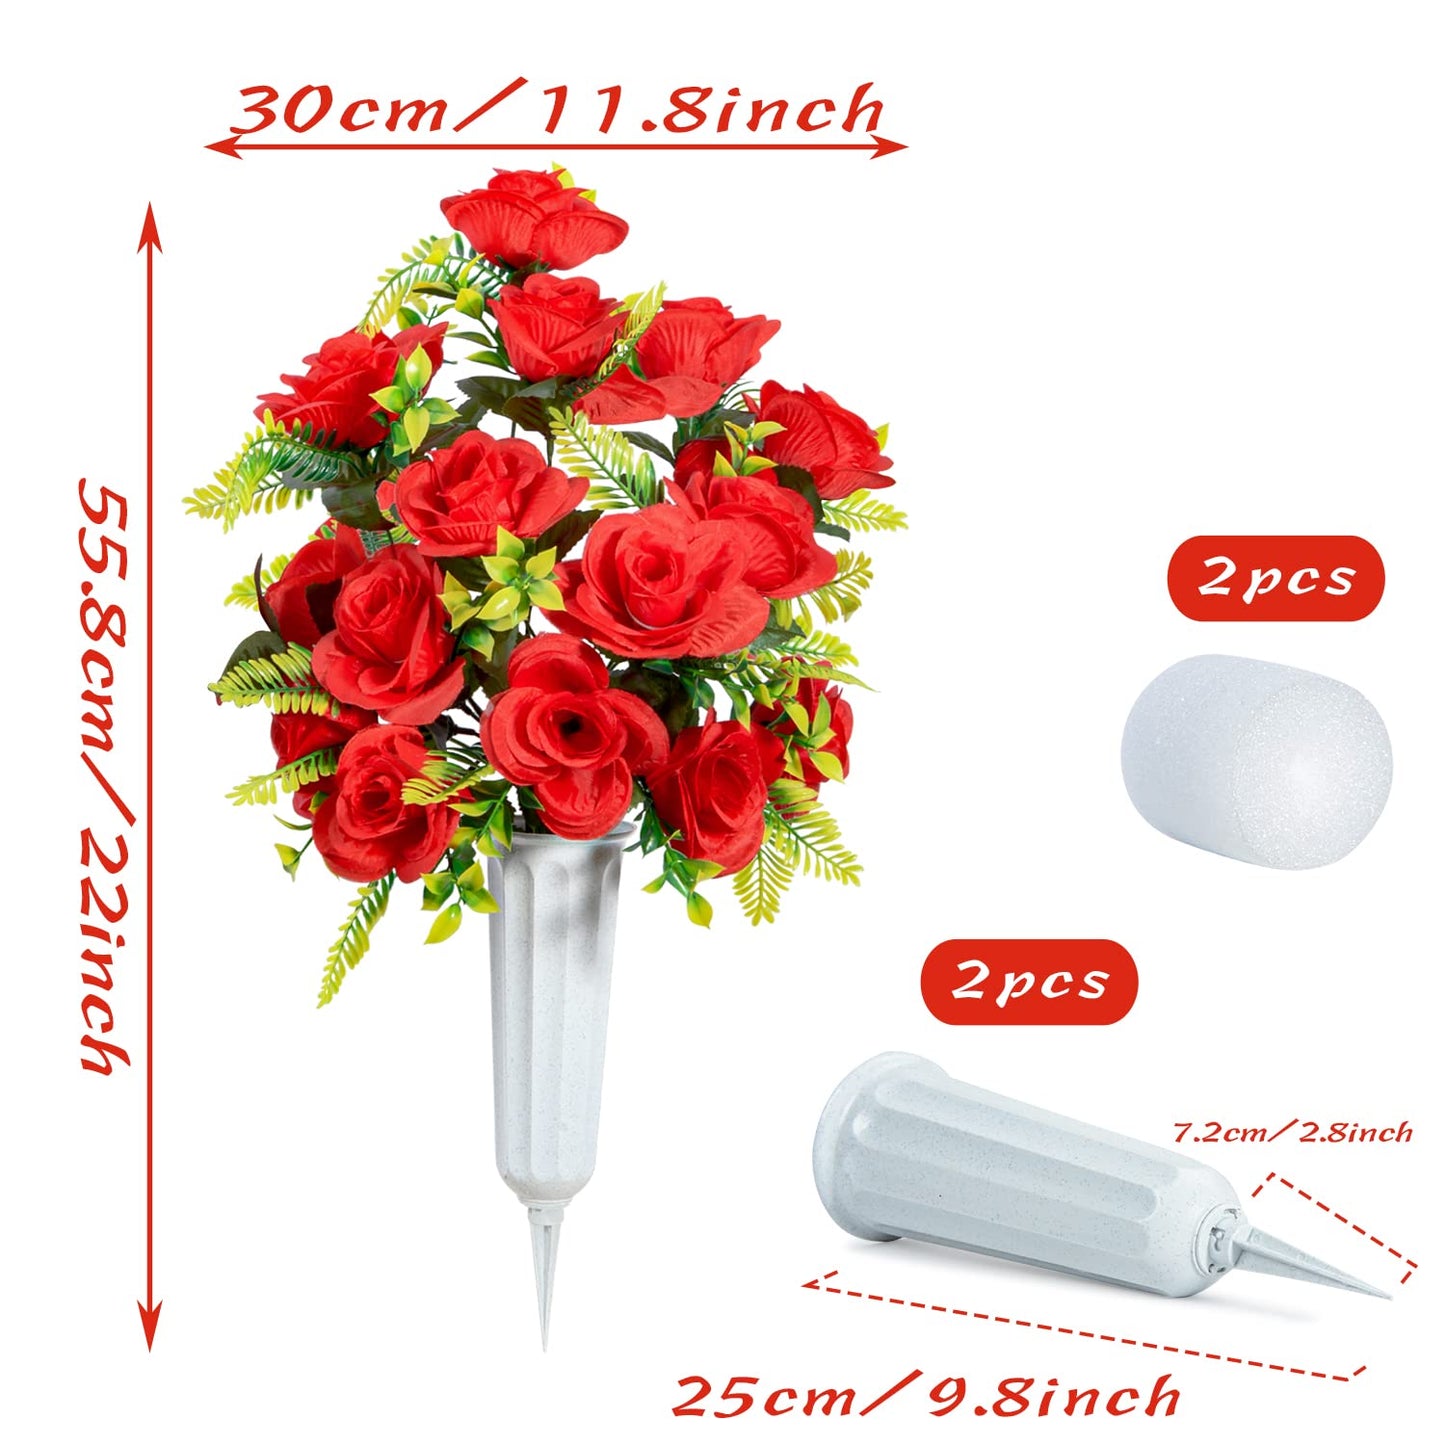 XONOR Artificial Cemetery Flowers with Vase, Set of 2 Artificial Rose Bouquet Graveyard Memorial Flowers for Cemetery Headstones Decoration (Red-2Pcs)